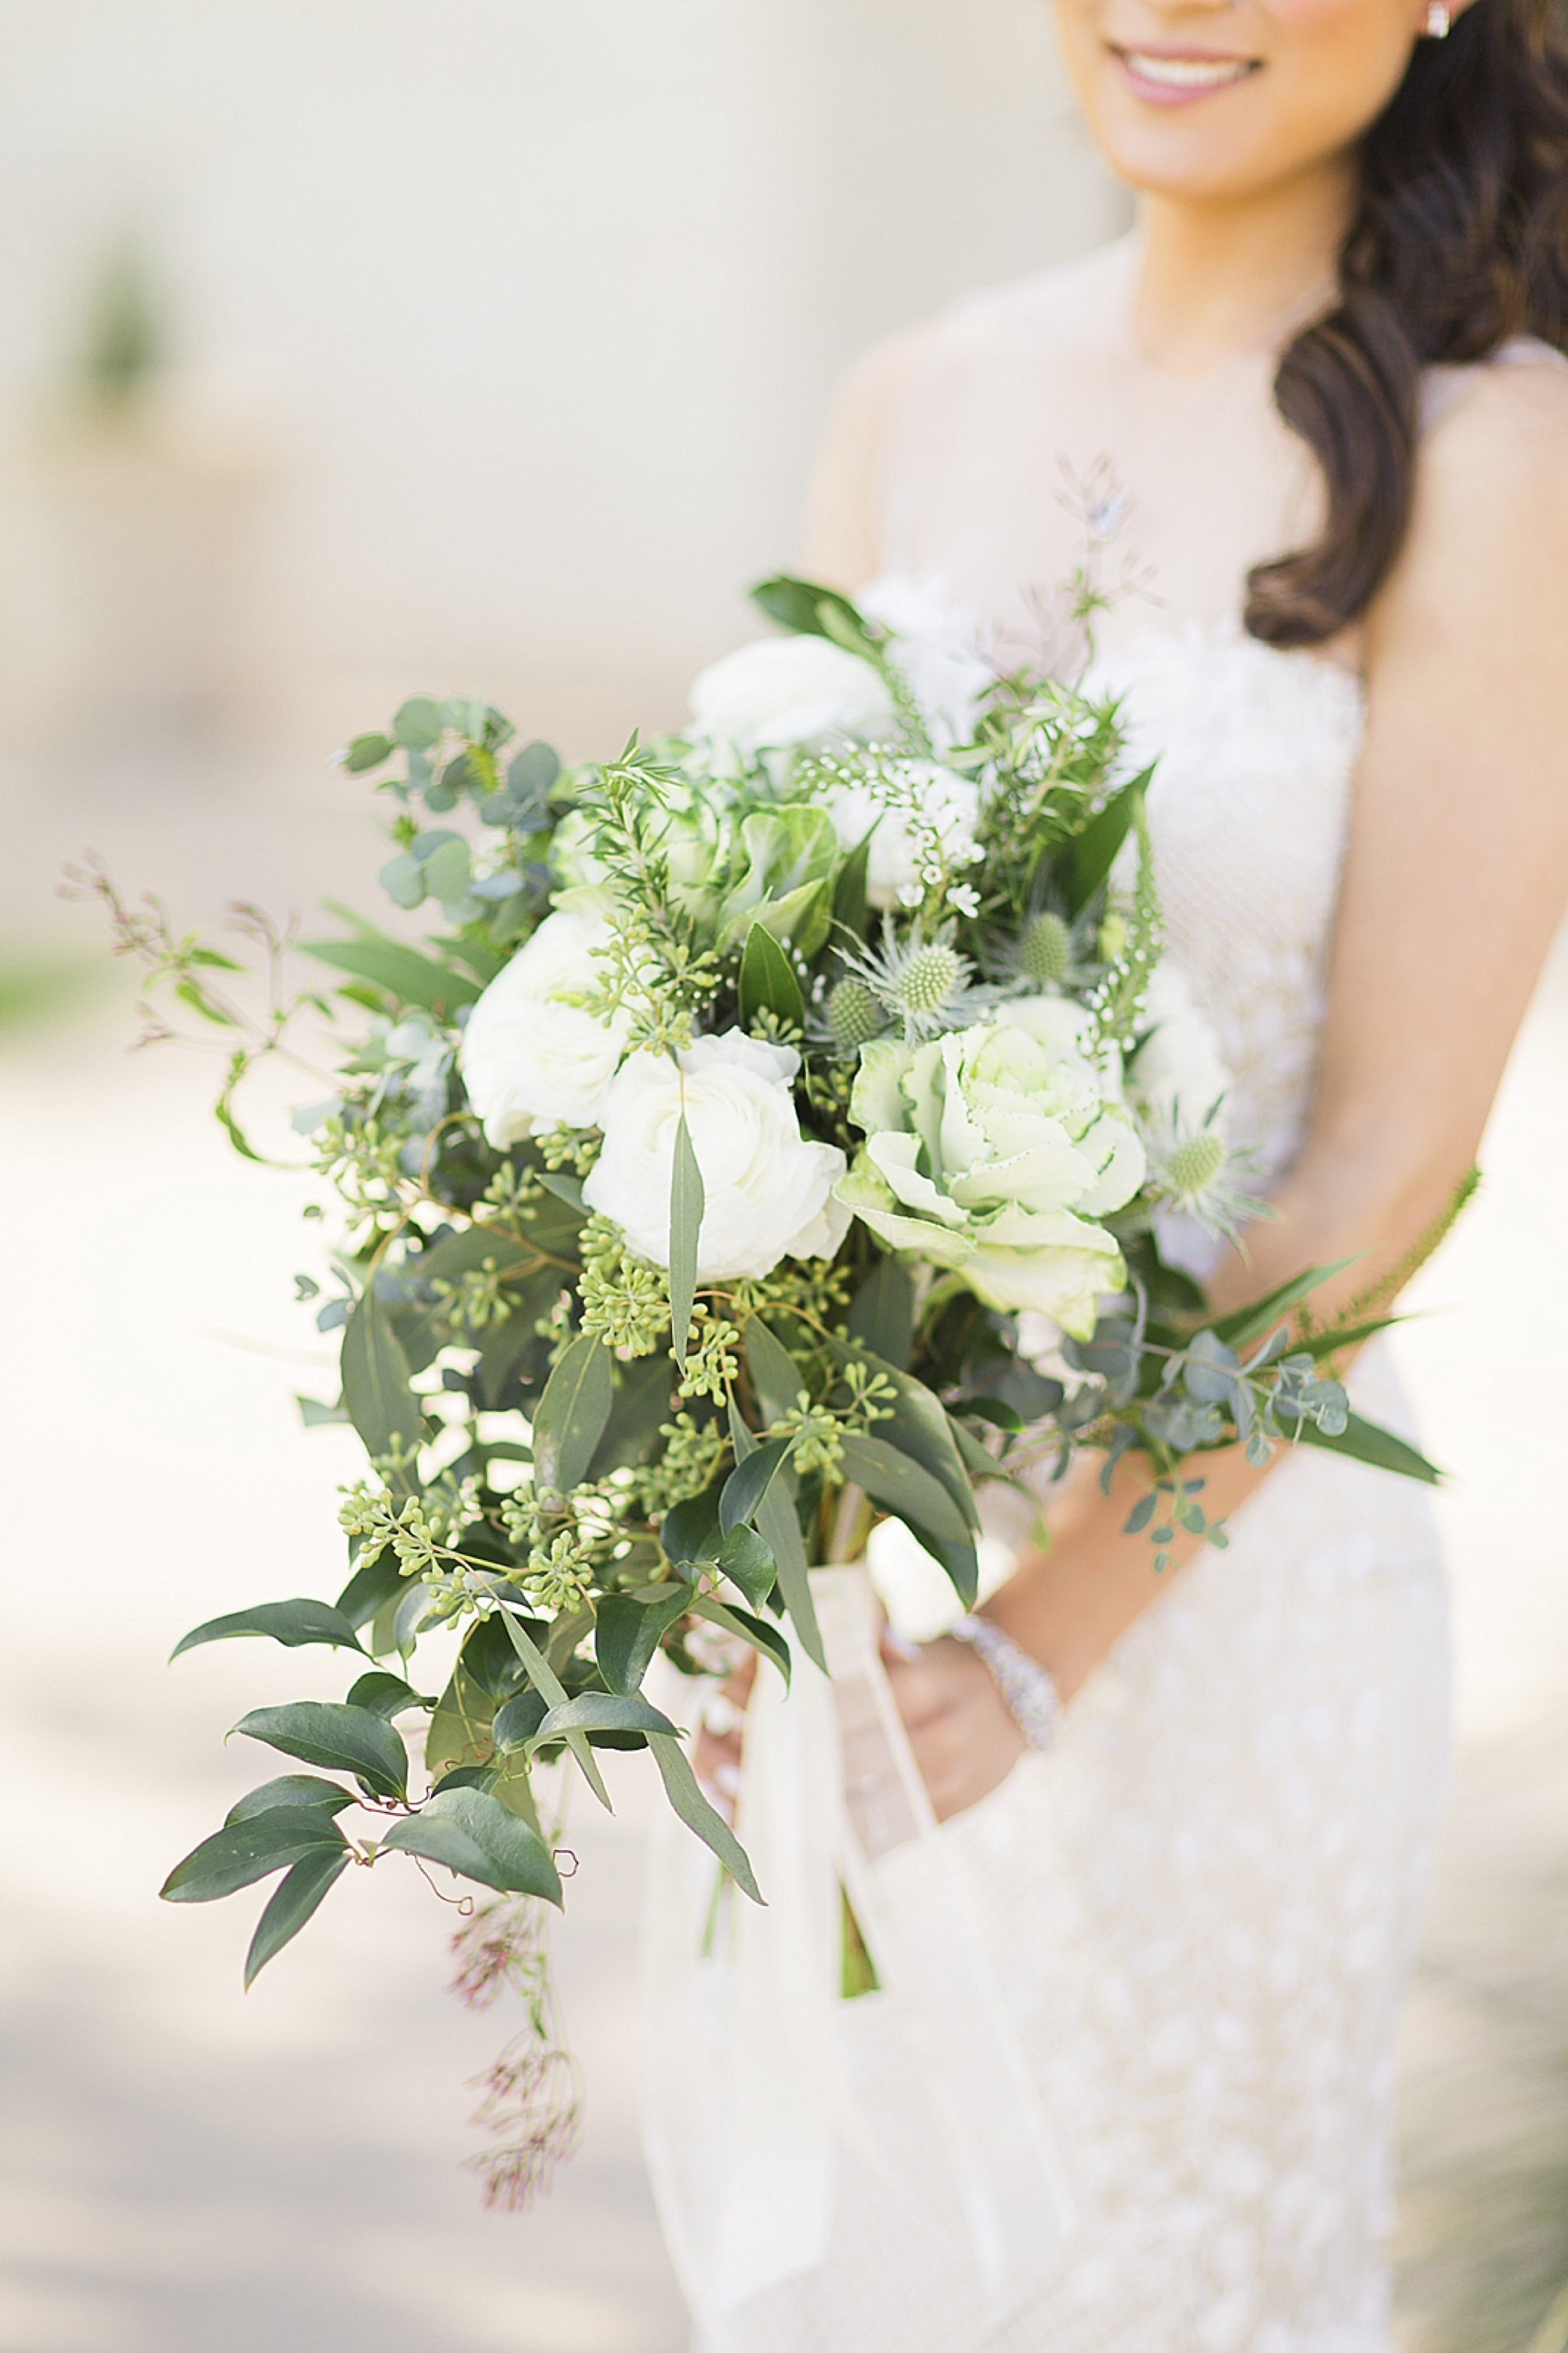 gorgeous white and green bouquet with kale